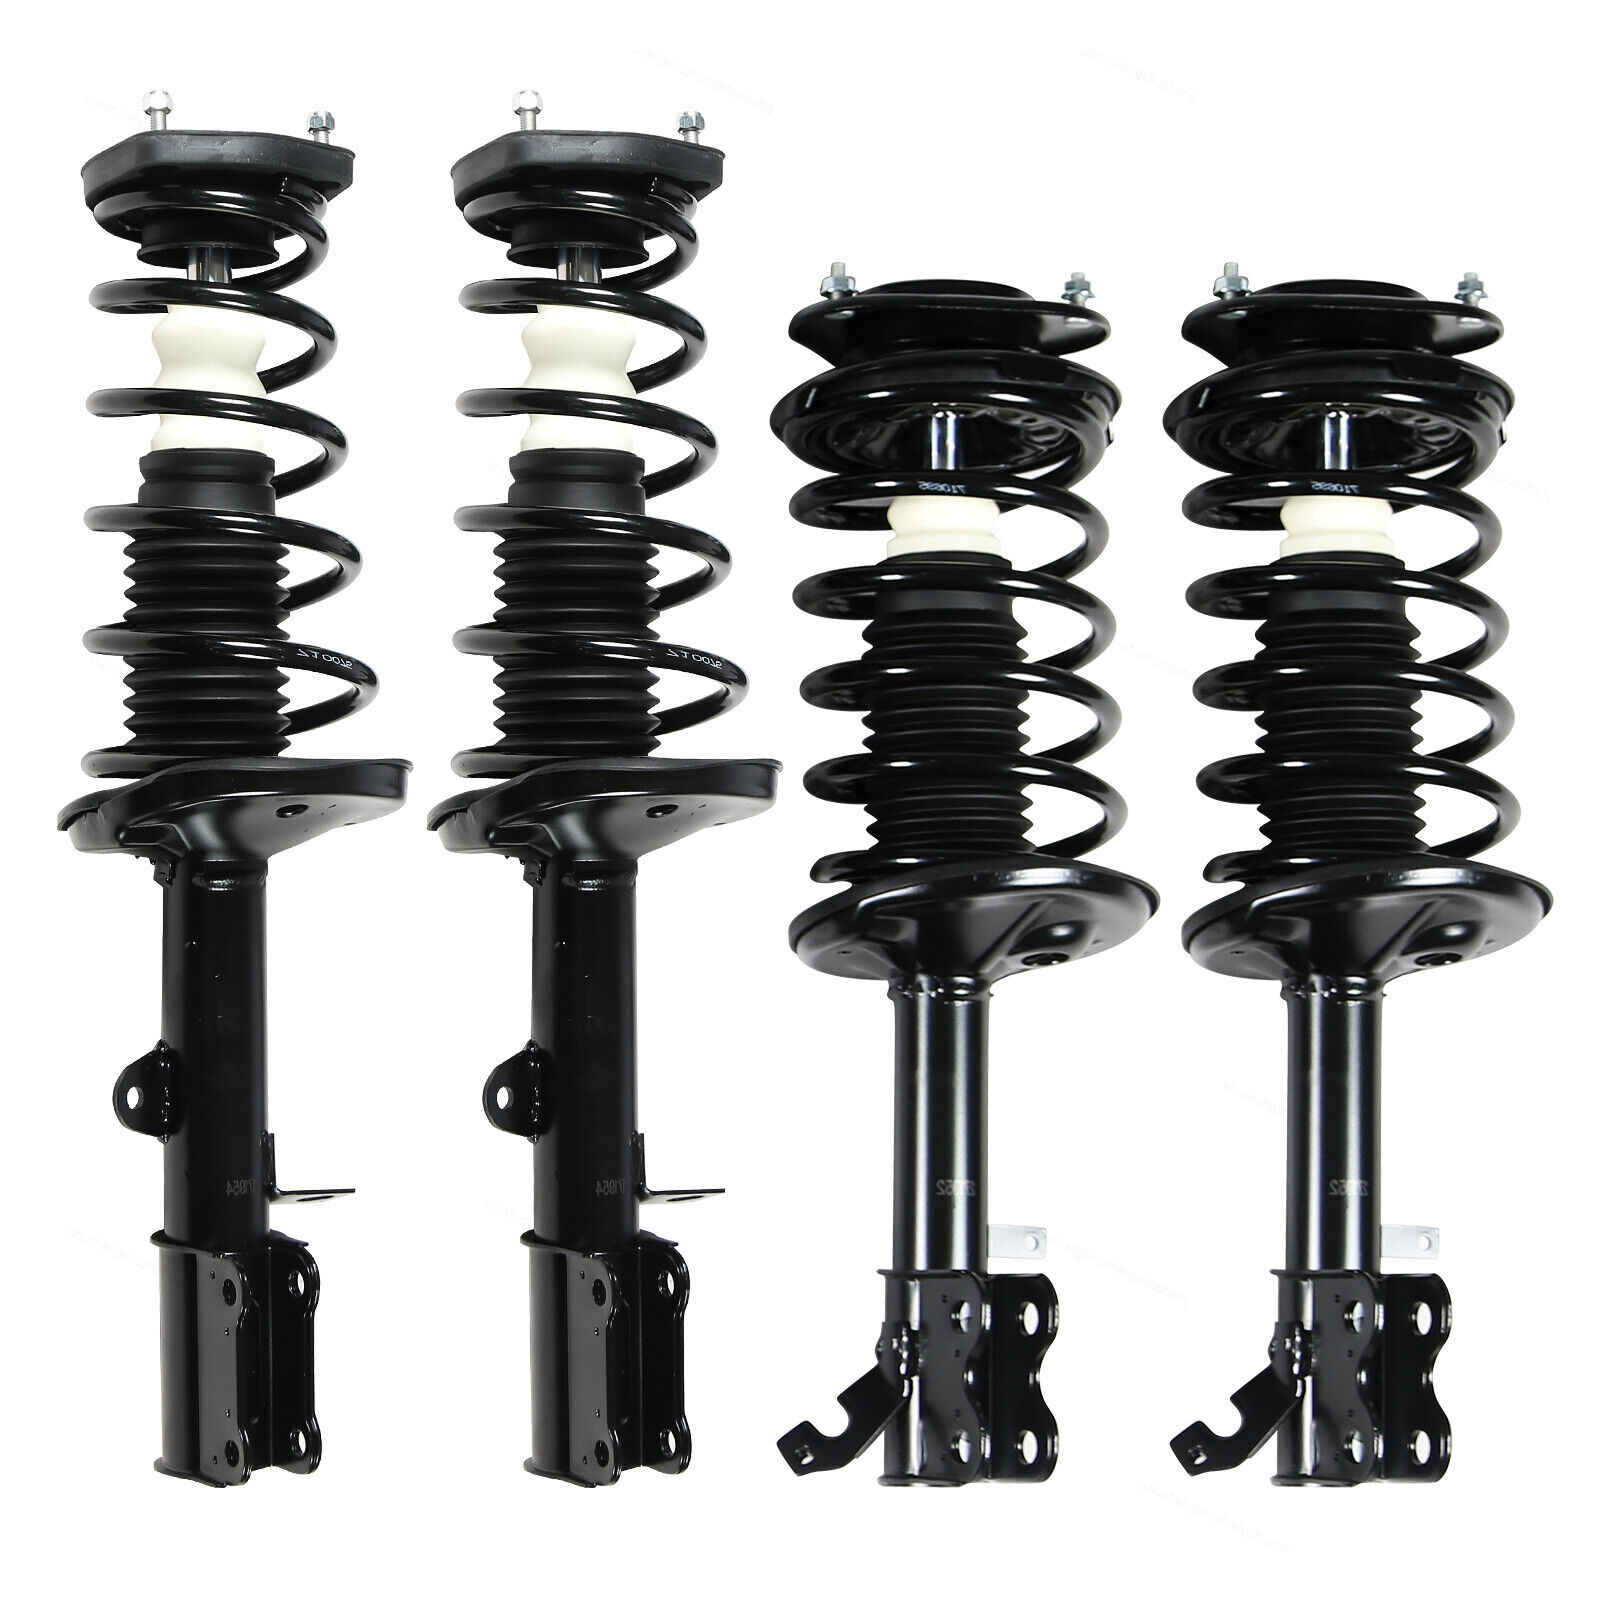 Front Rear Shock Struts Fit For 1993-2002 Toyota Corolla Chevy Prizm 4 Assembly